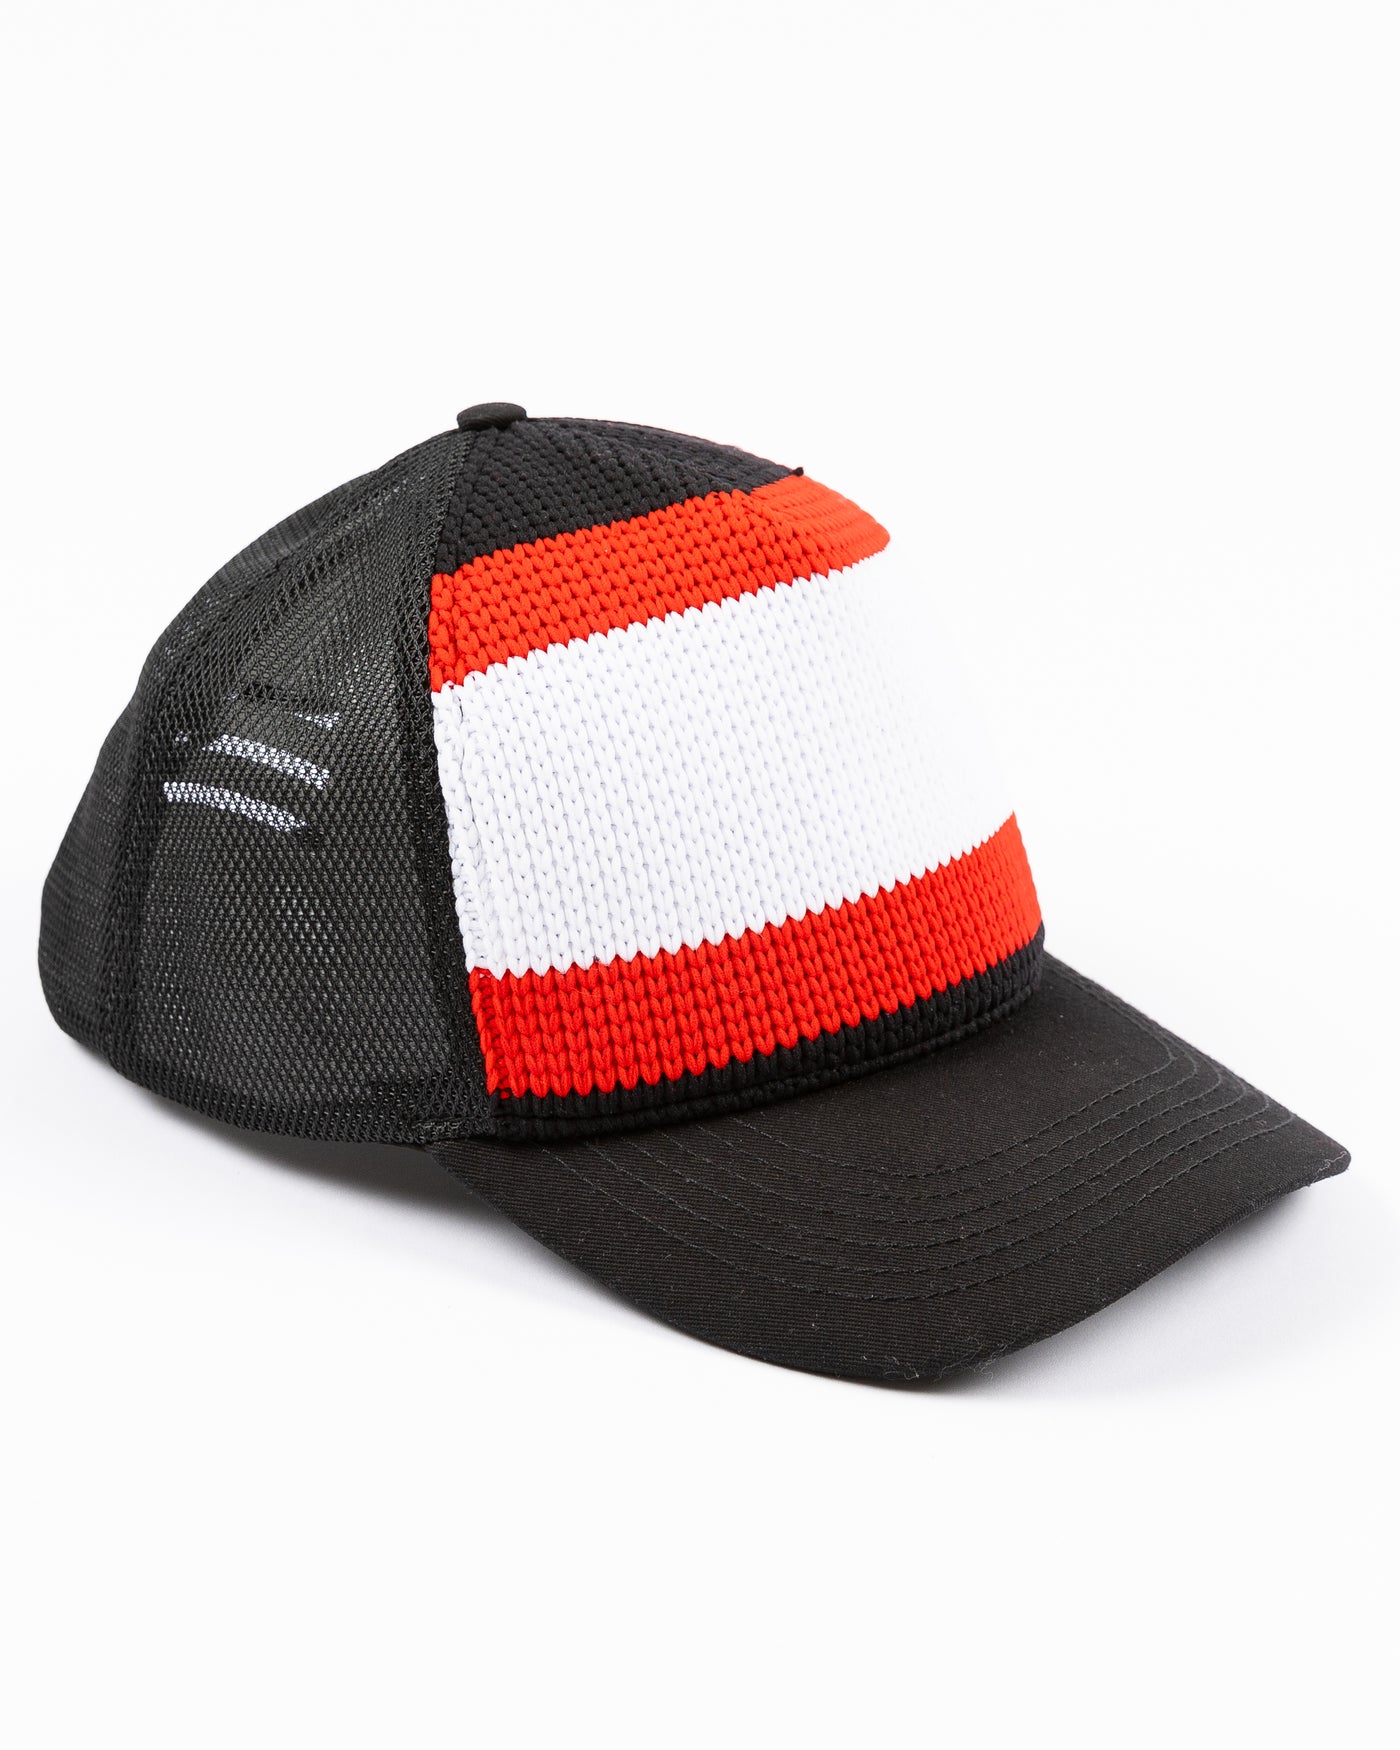 black Gongshow trucker hat with red and white stripe pattern and Chicago Blackhawks secondary logo embroidered on left side - right angle lay flat